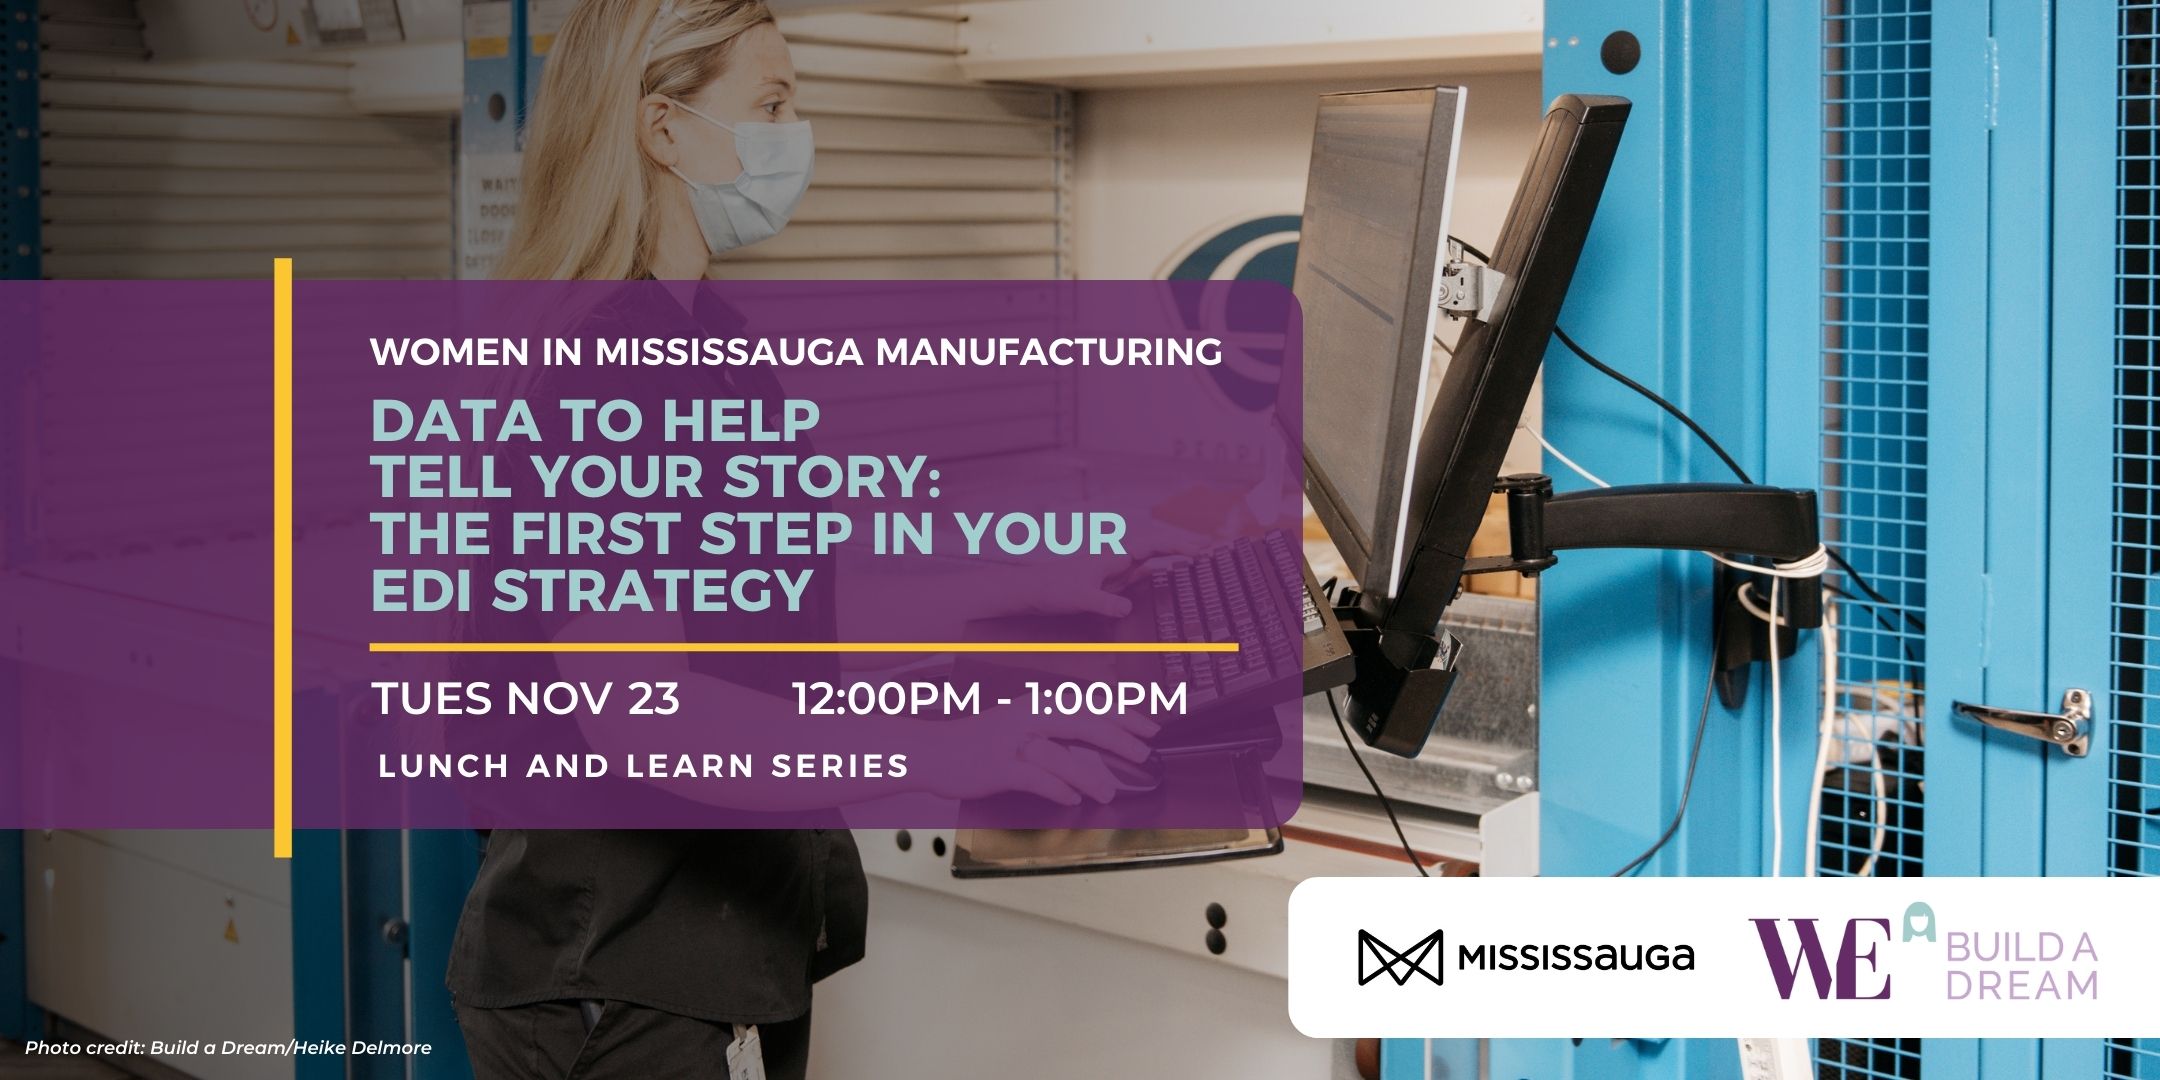 Women in Mississauga Manufacturing | Using Data to Tell Your Story – Webinar Nov 23